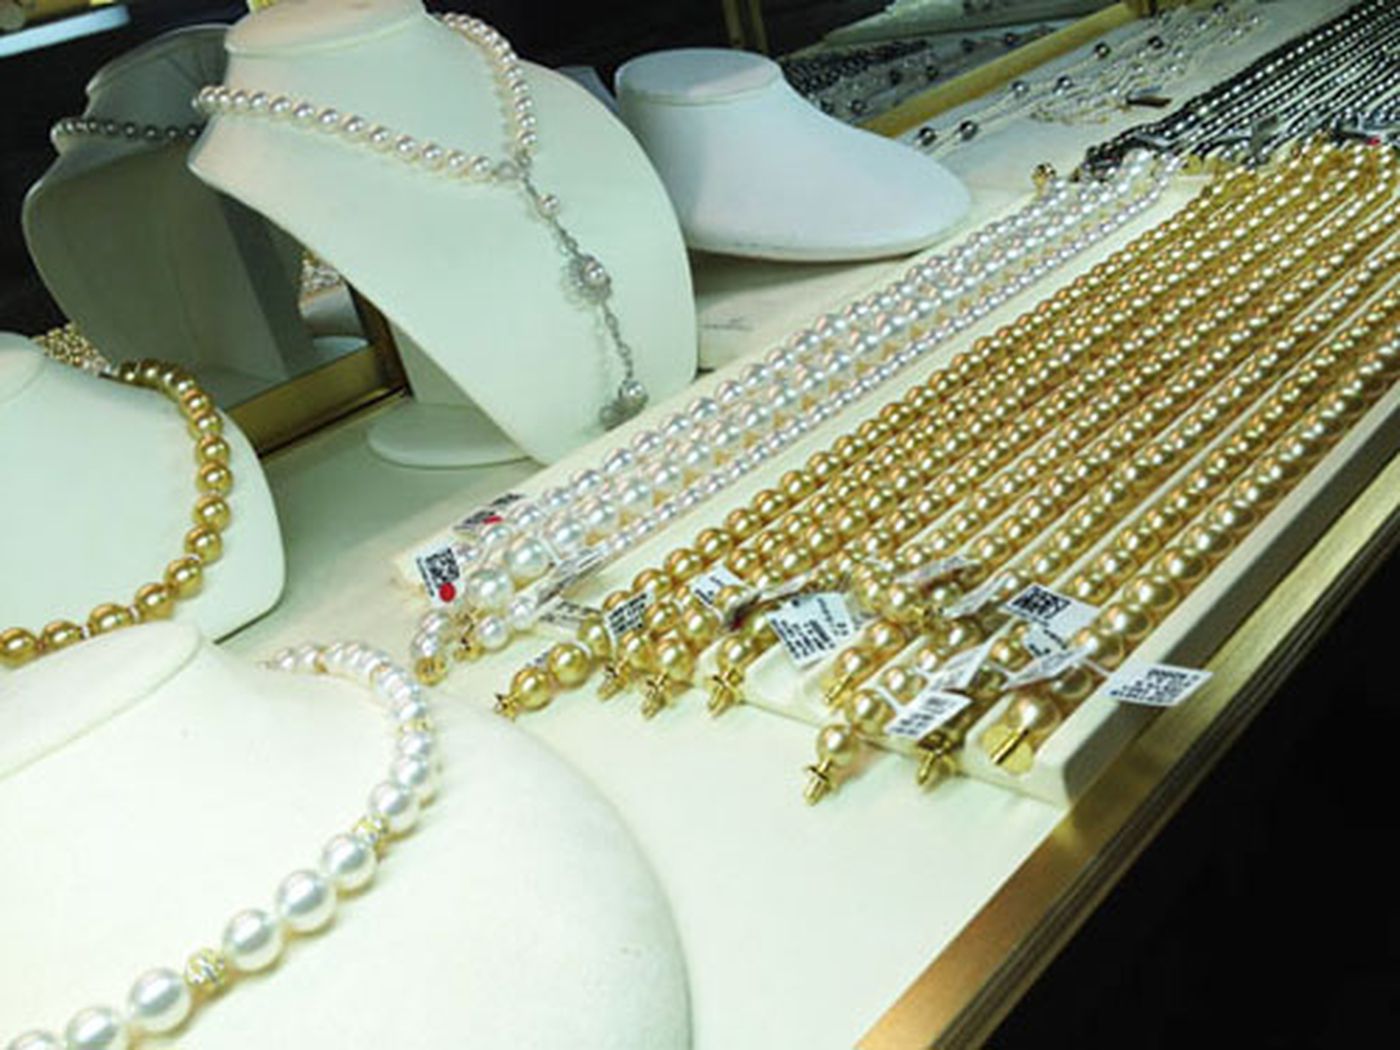 Up to 70% off pearls is still pretty pricey at the mikimoto sale.